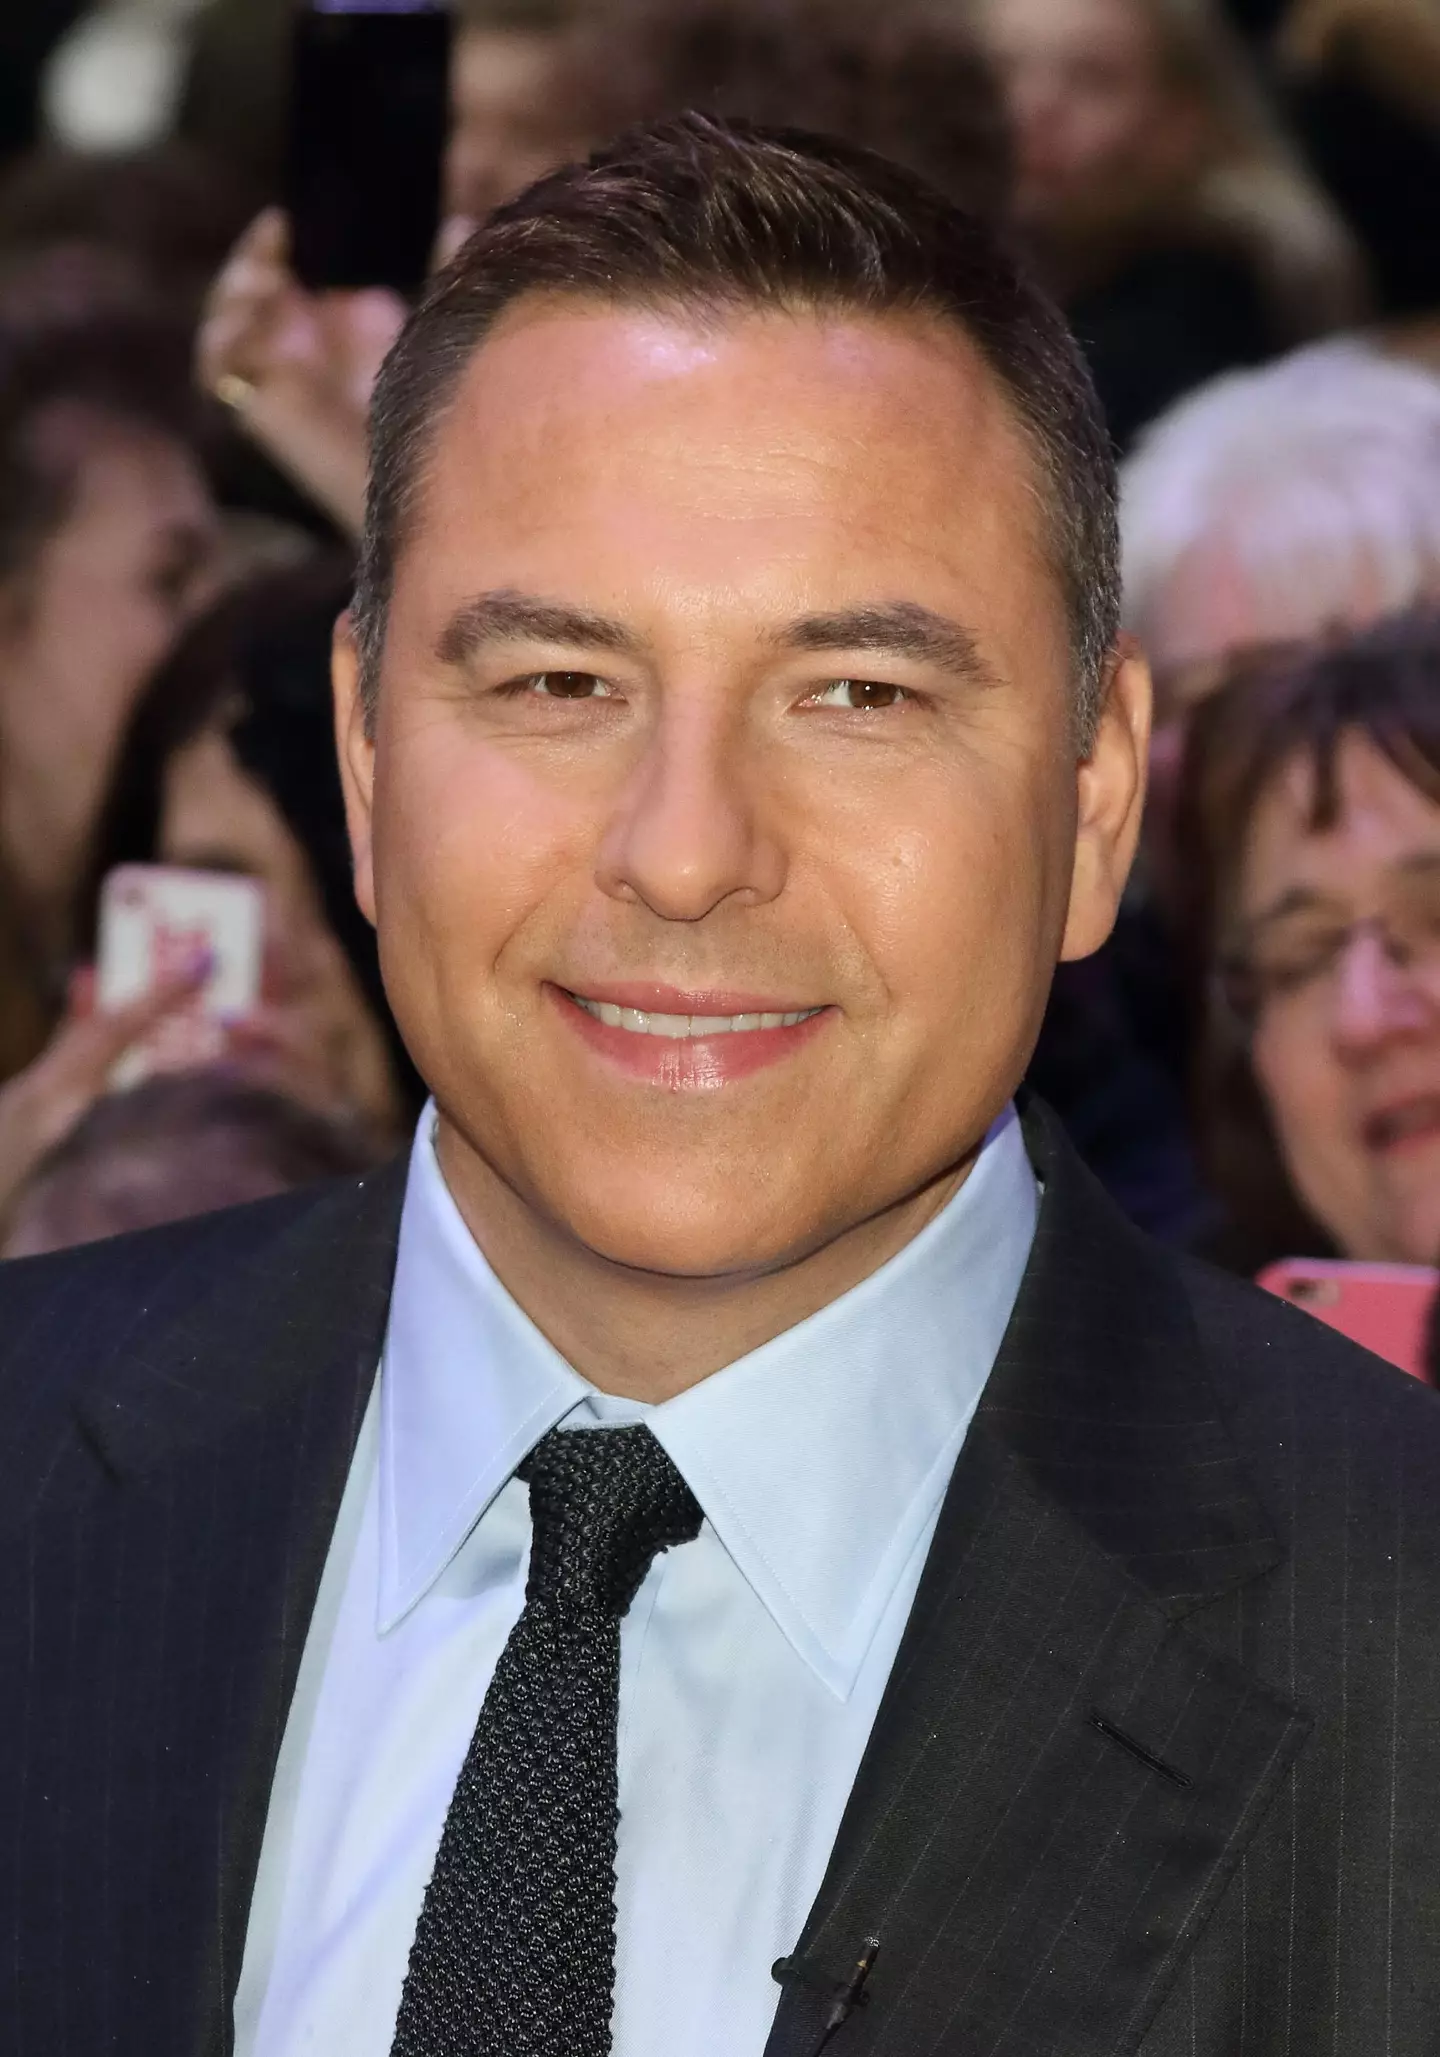 An old David Walliams sketch has resurfaced online and now fans are calling for investigation.